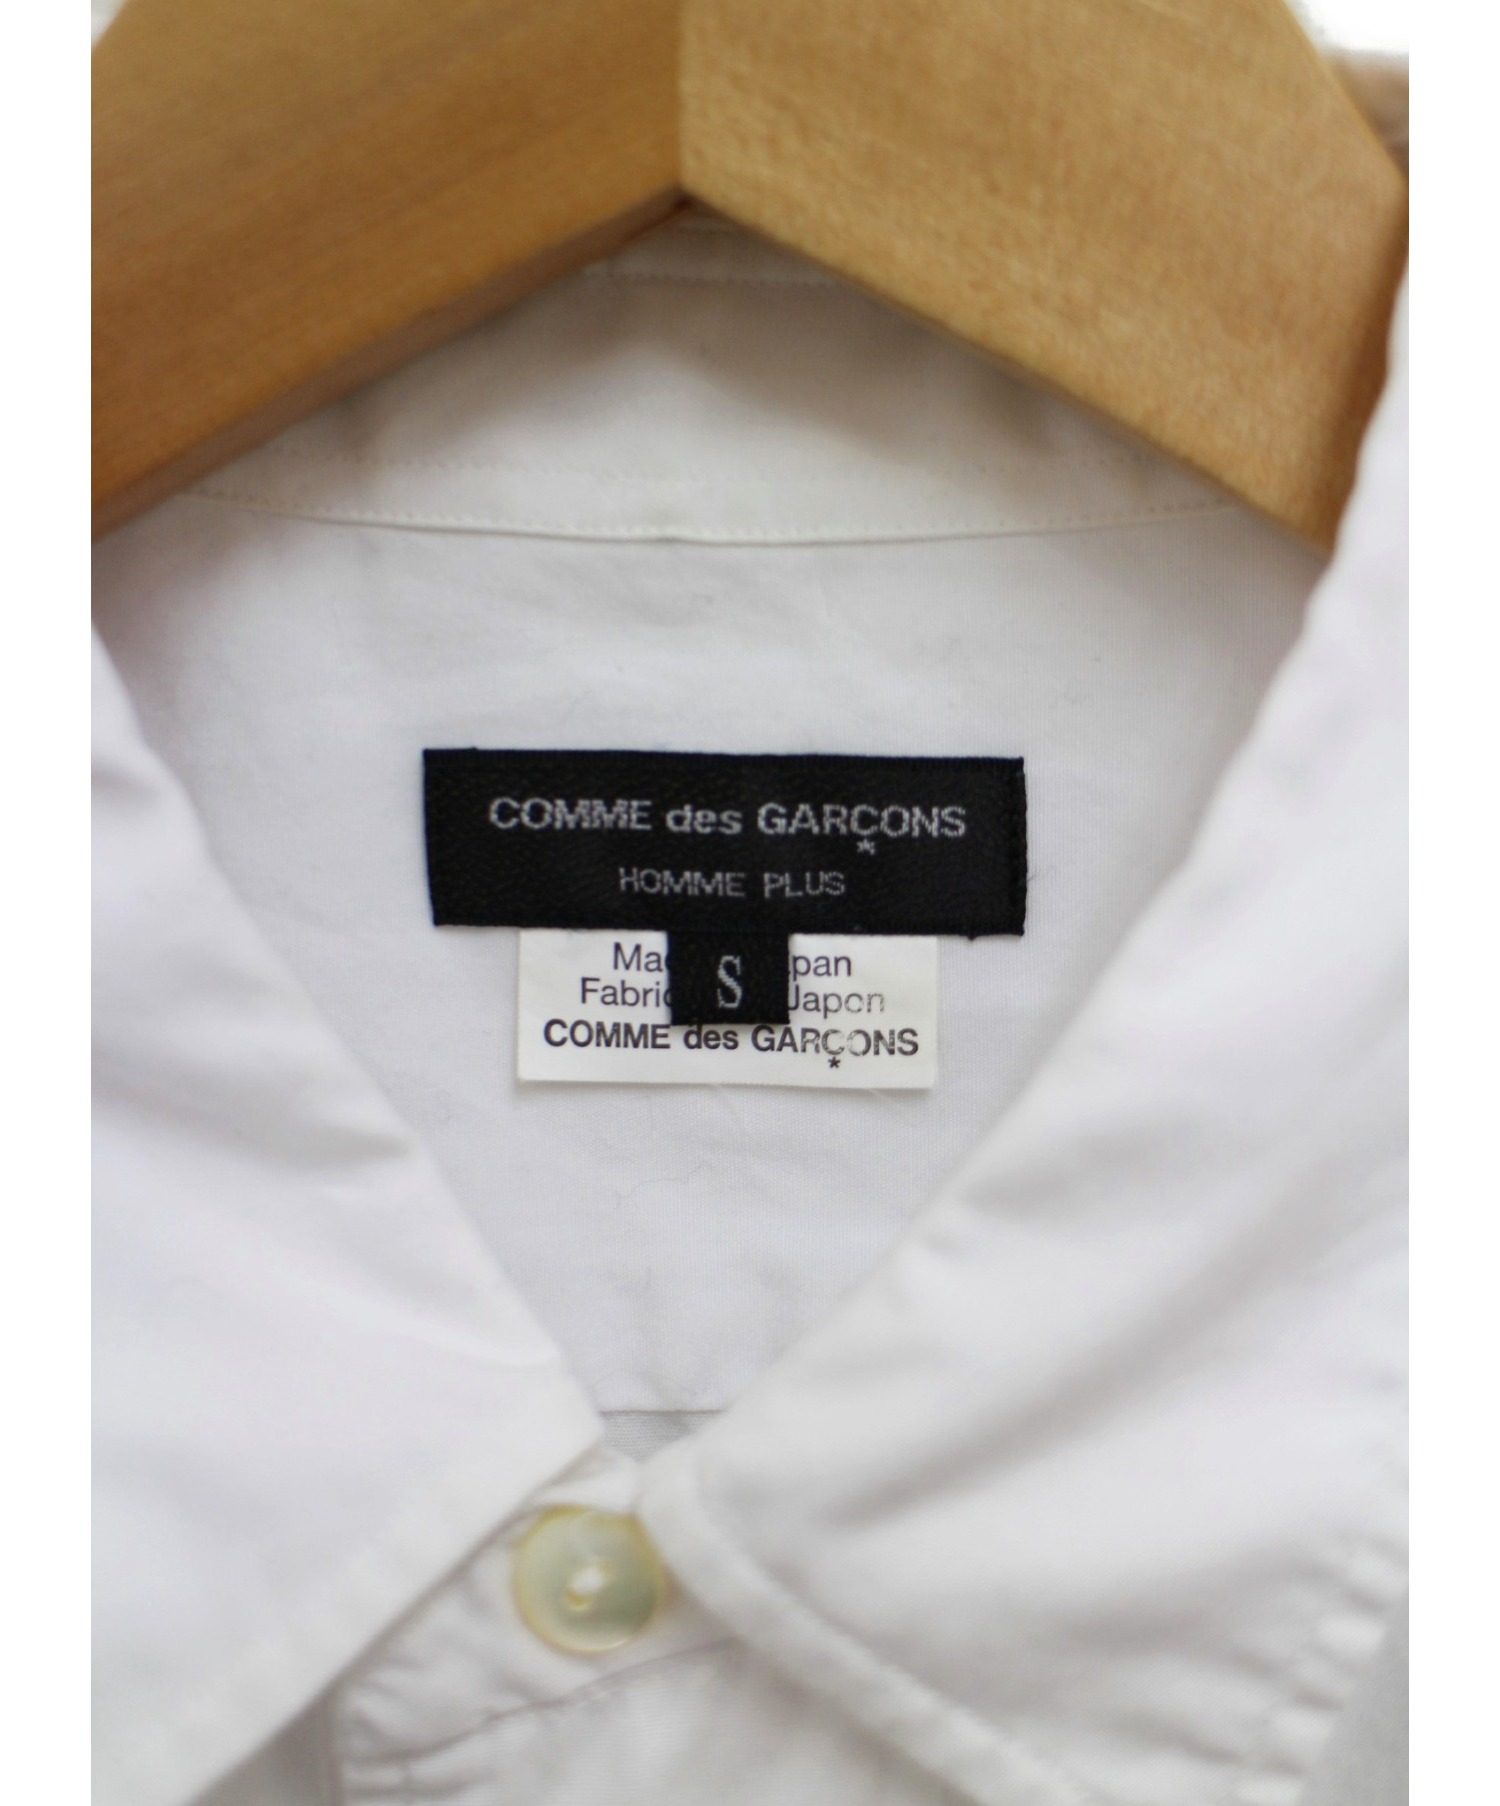 96ss COMME des GARCONS HOMME plus リフレクター | www.jarussi.com.br